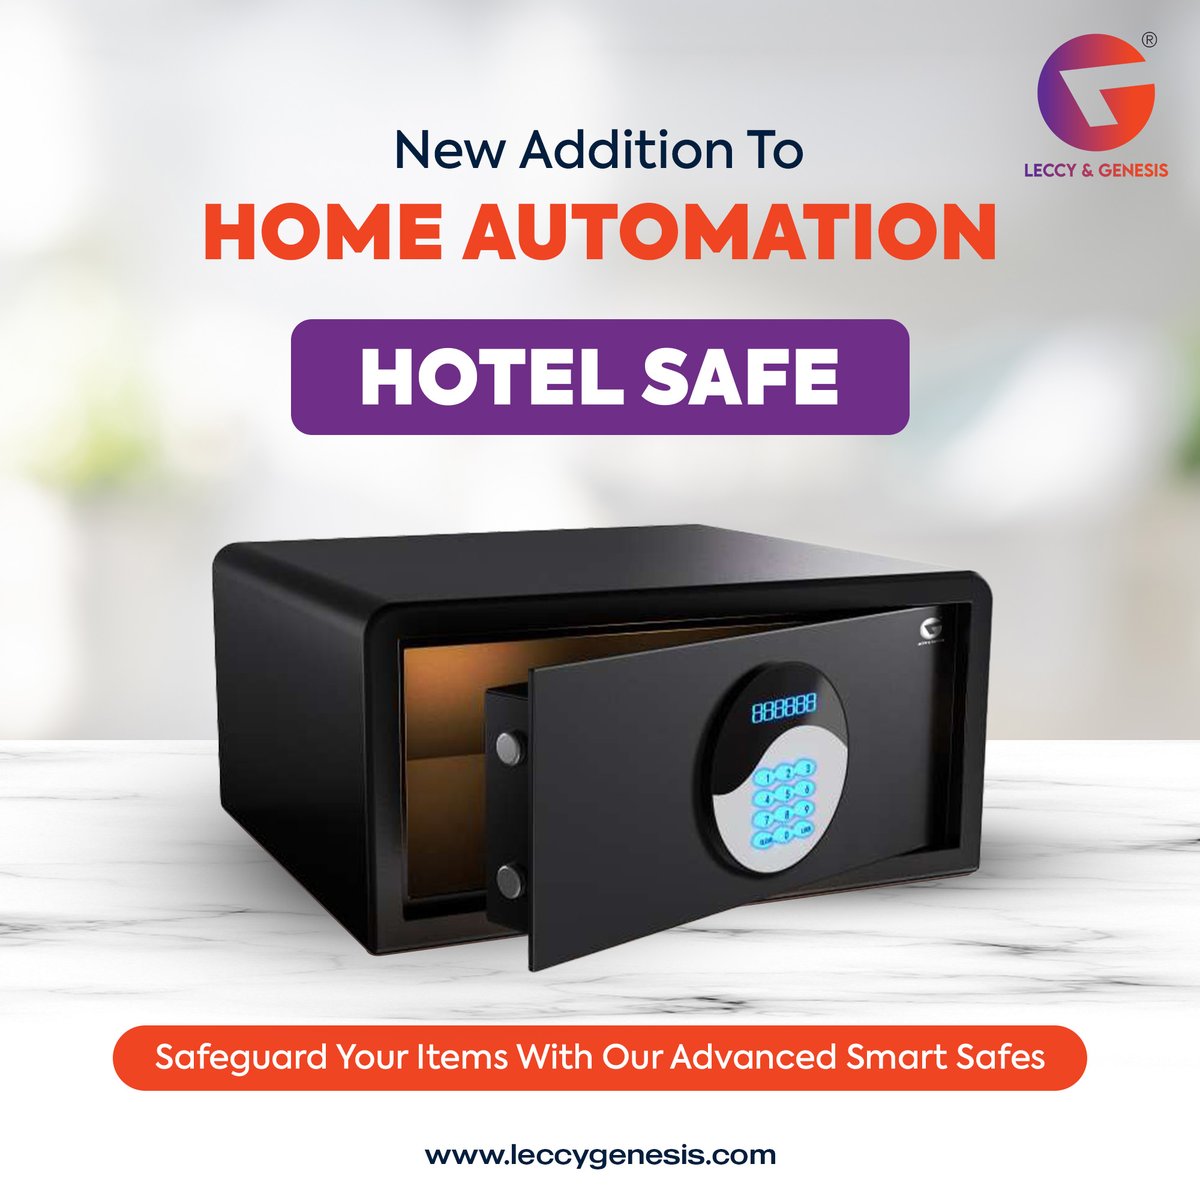 Safe and Sound: Protecting Your Valuables with L&G's Reliable Hotel Safe.
Comes with Password & Emergency Key.

Buy Now : leccygenesis.com/products/l-g-h…

#hotelautomation #smarthotel #hotel #locker #safe #branded #onlinebuy #Sale #luxury #leccygenesis #urjasmart